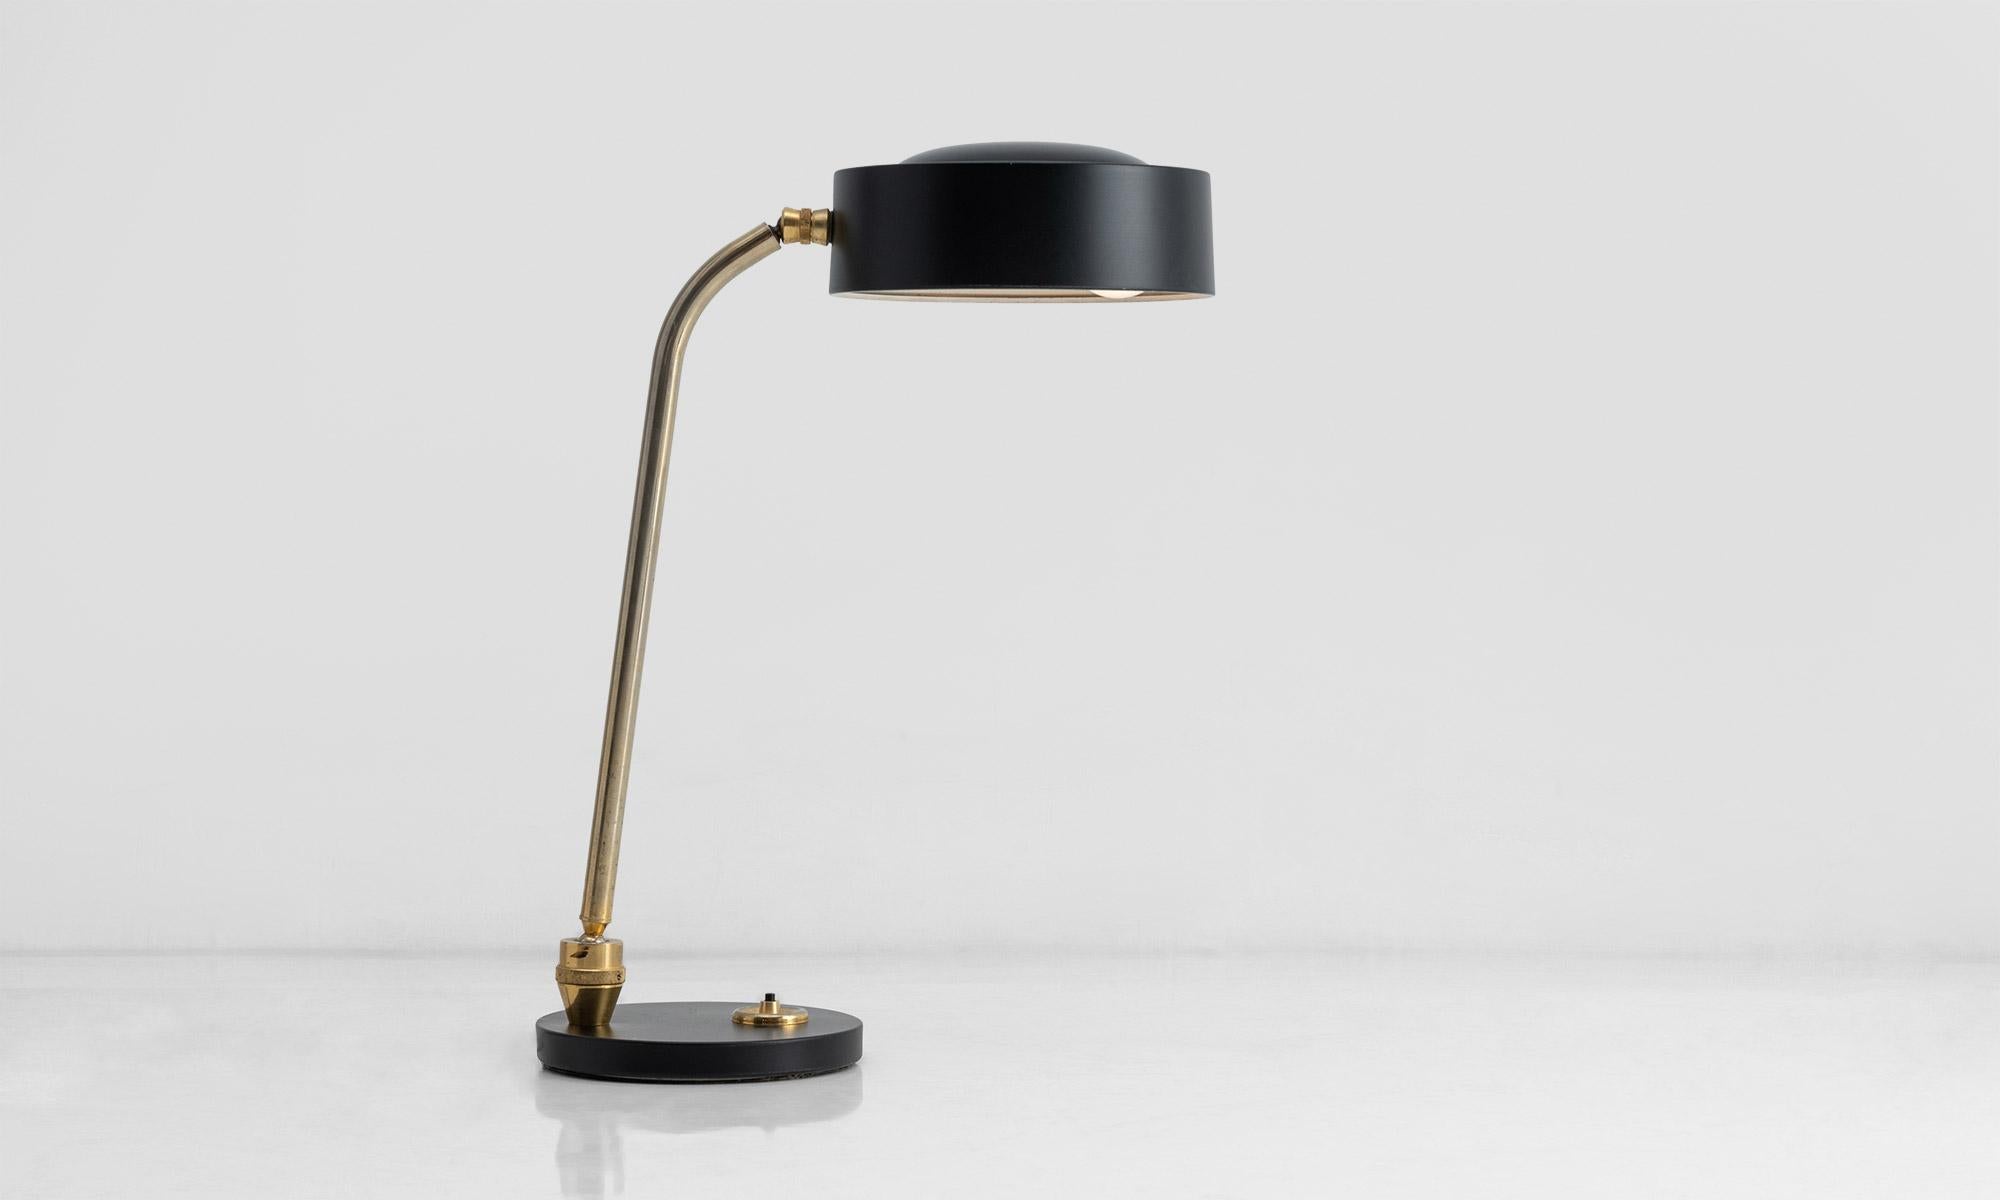 Articulating desk lamp by Charlotte Perriand

France Circa 1950

Produced by Jumo, with circular black metal shade, articulating bent brass arm and black metal base.

8.25” W x 12.5” D x 20” H (as shown).